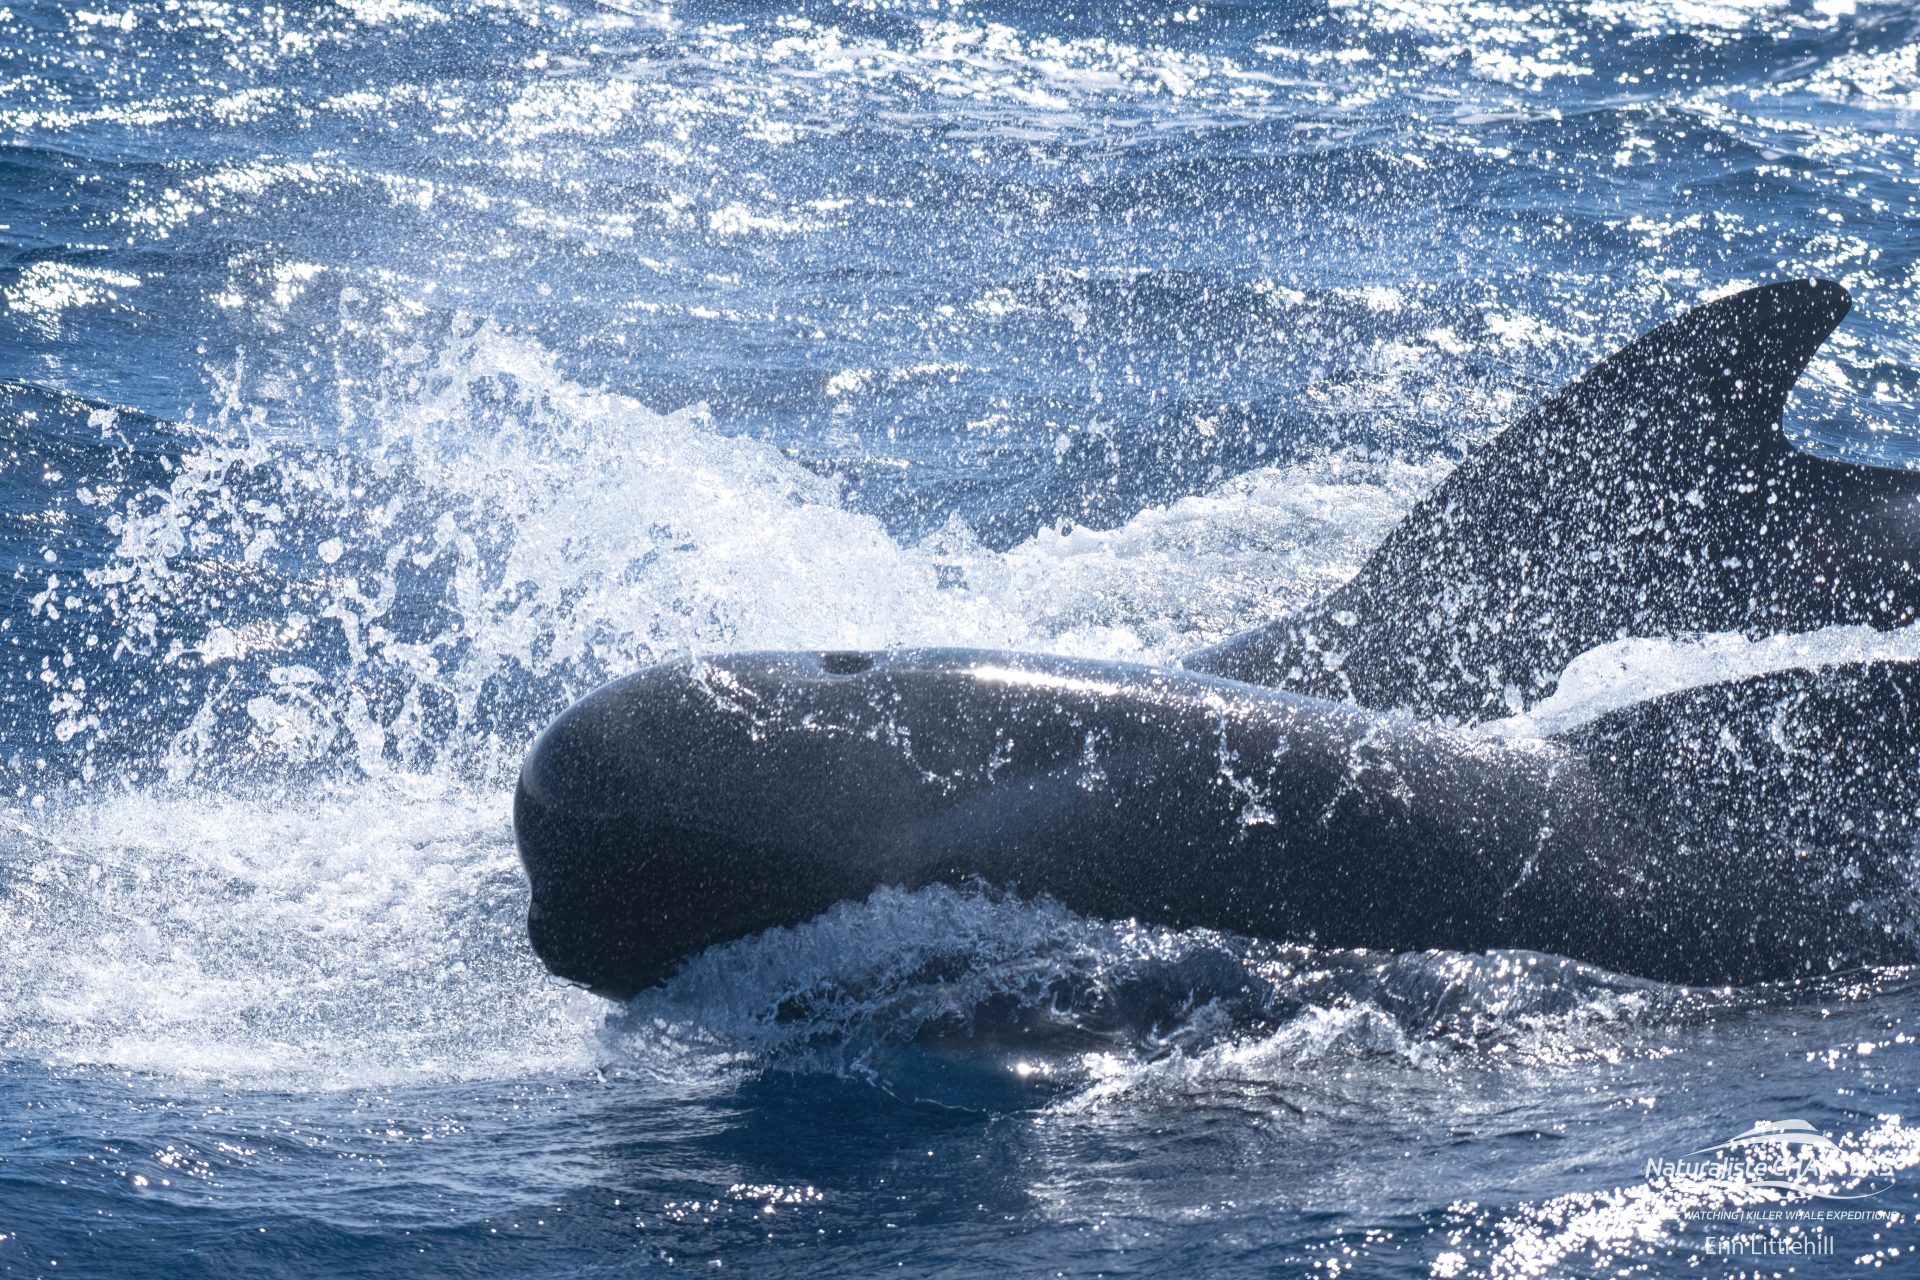 Pilot Whales are seen in large numbers